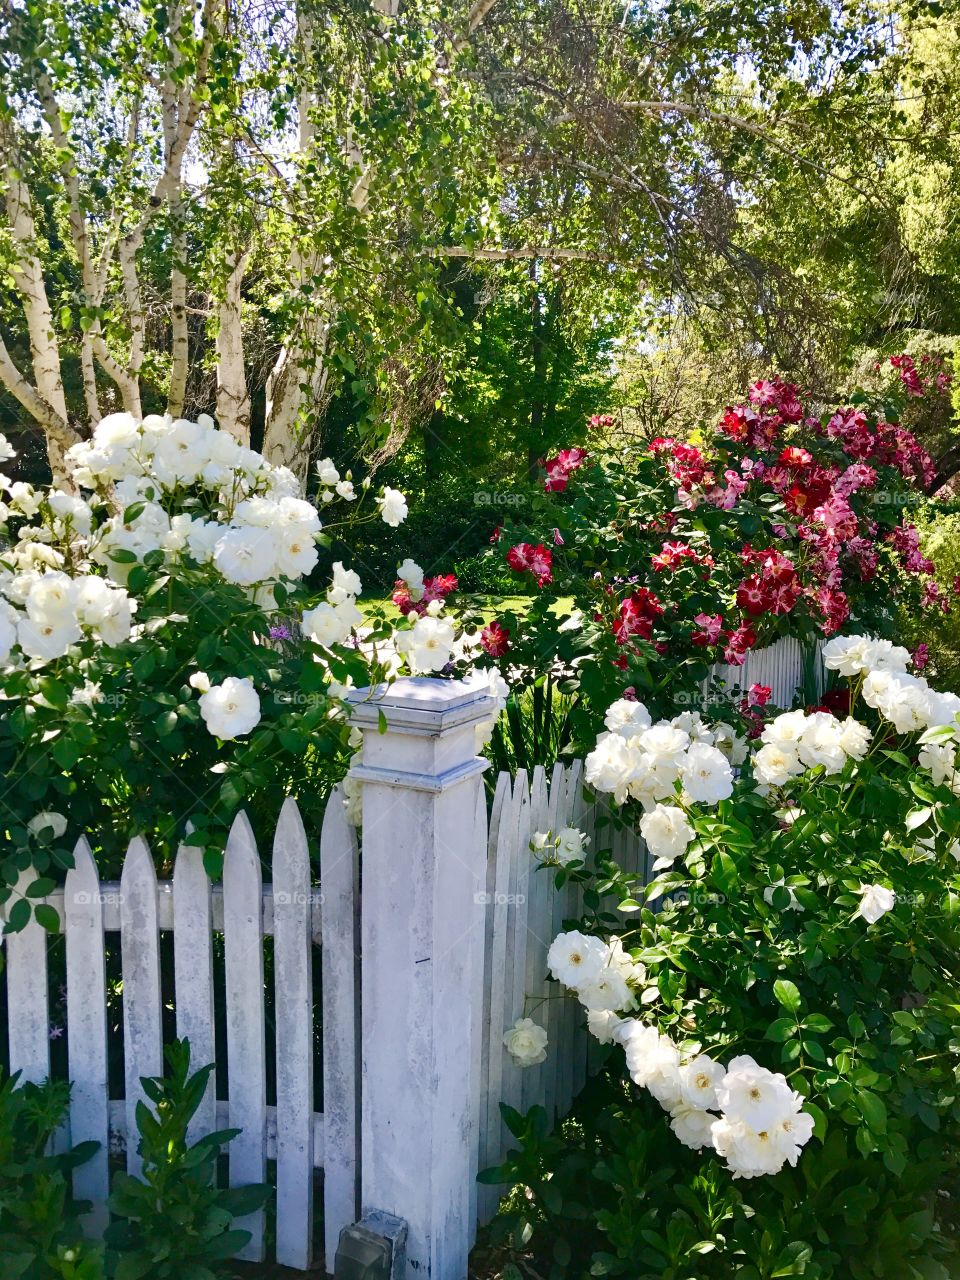 Roses beyond the gate